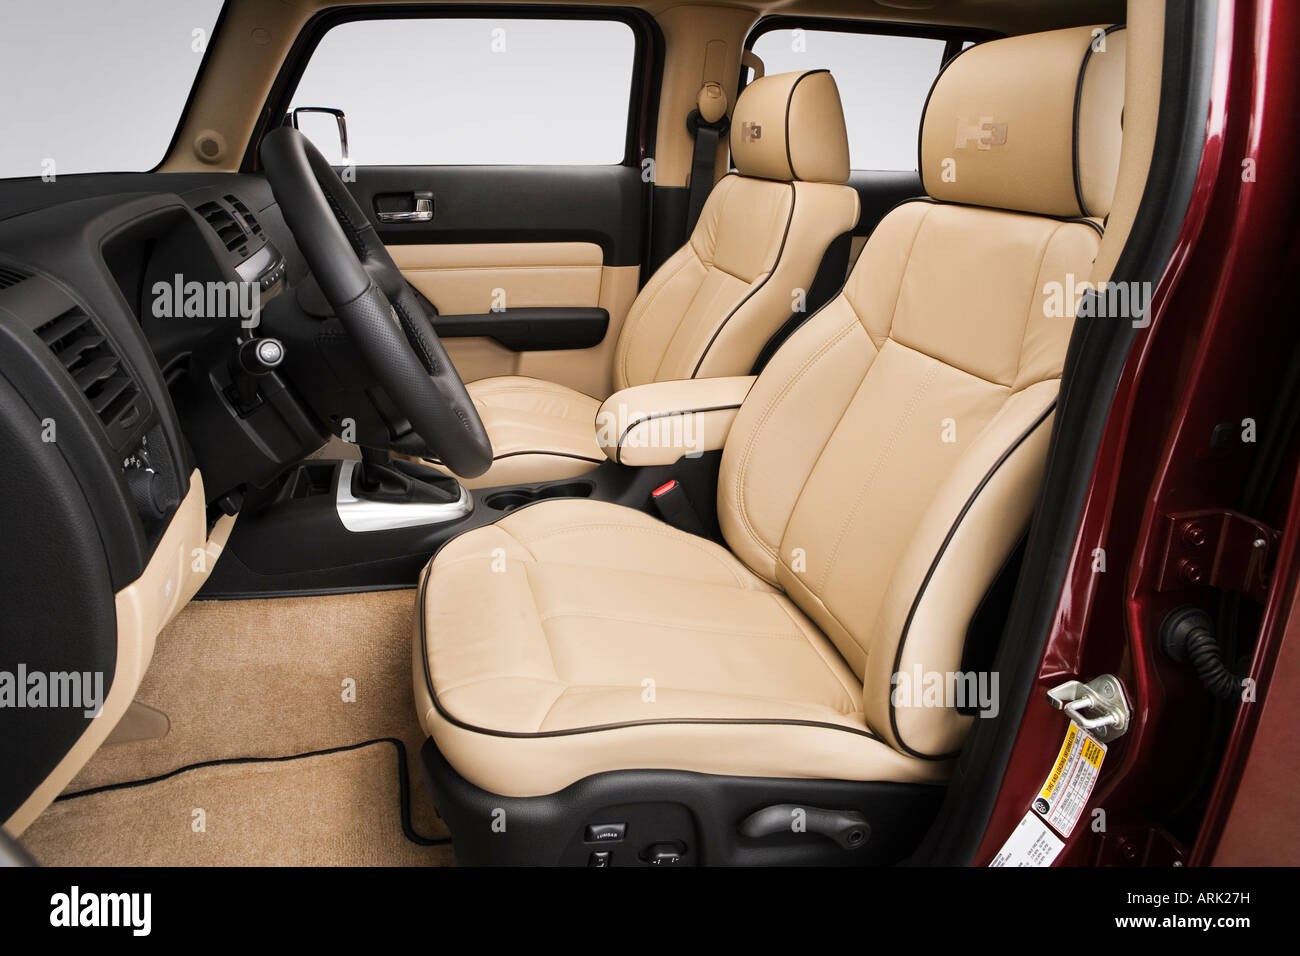 2008 Hummer H3 x in Red - Front seats Stock Photo - Alamy